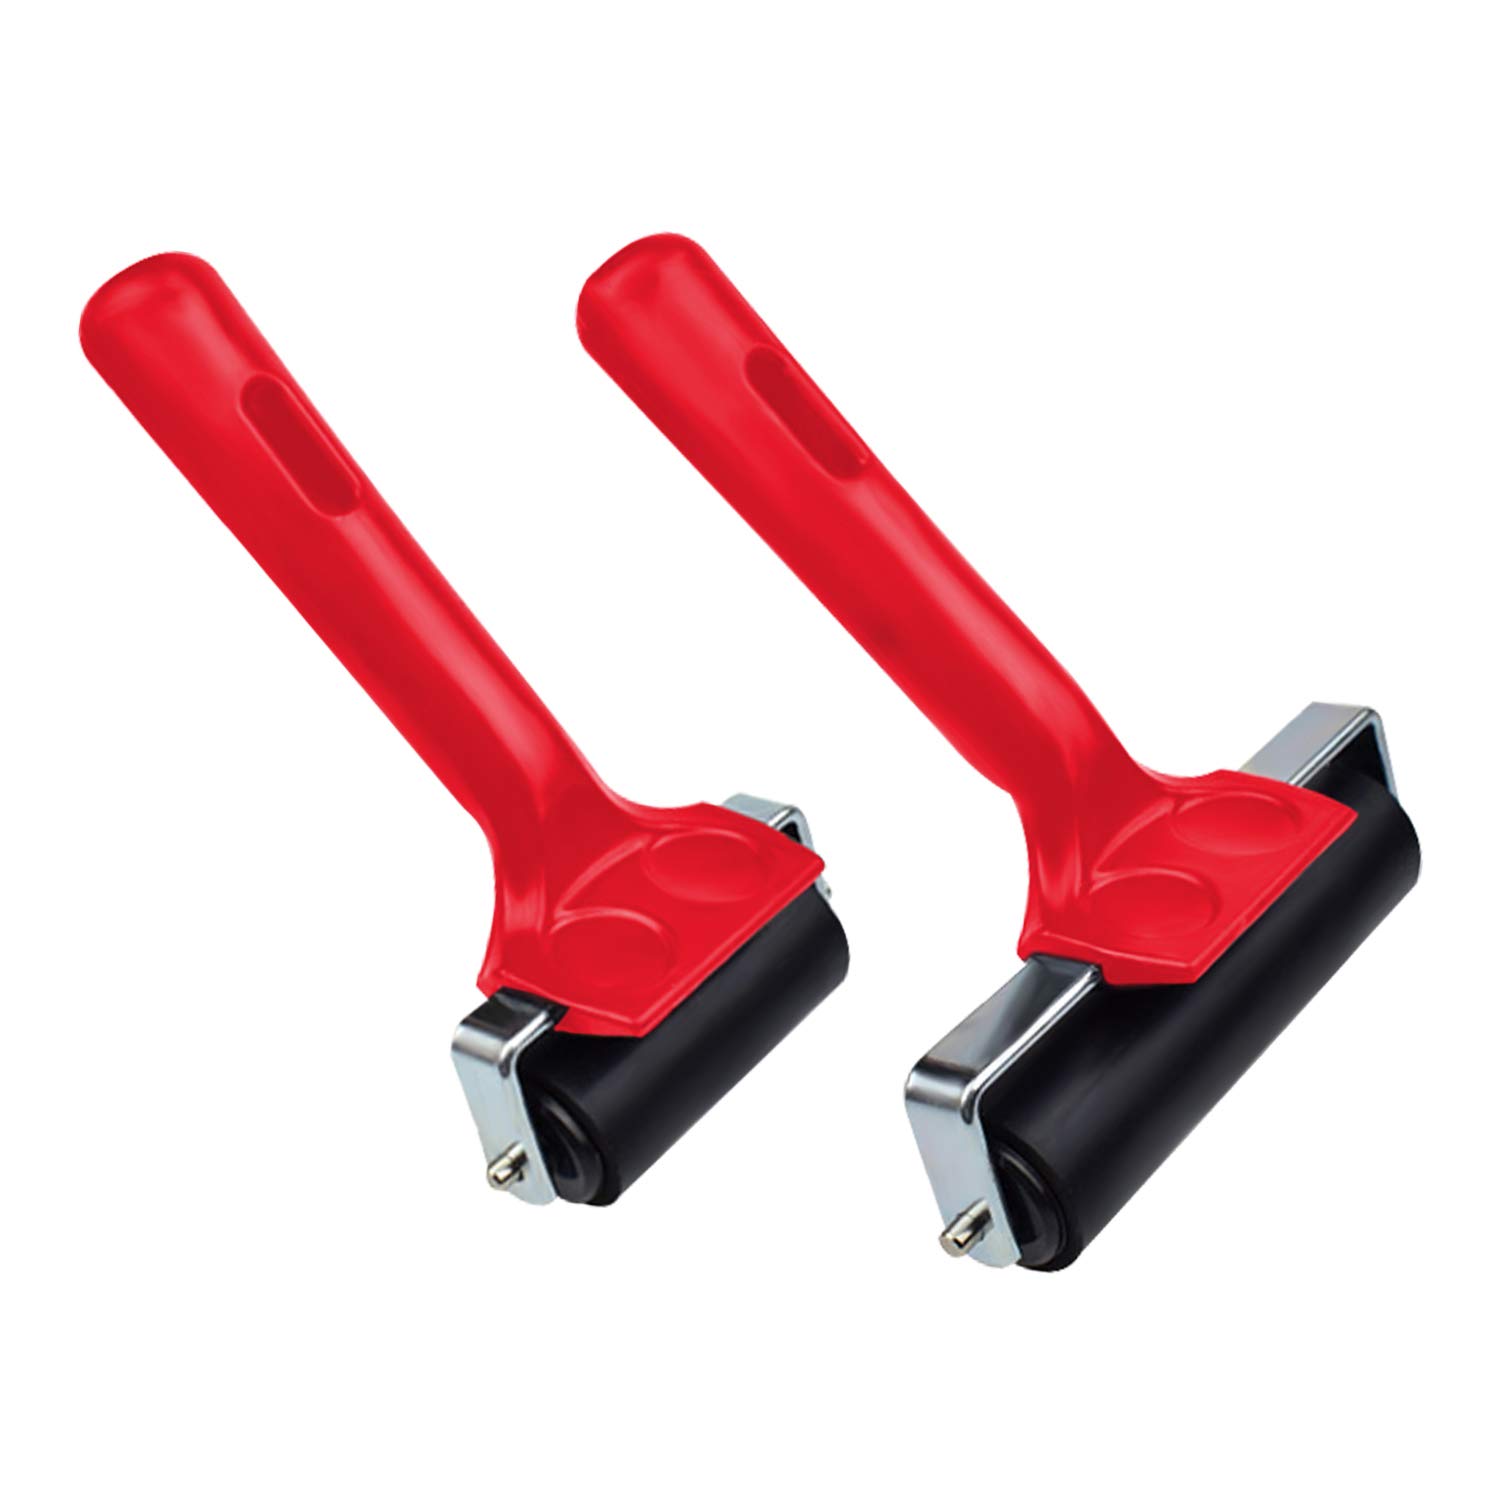 2 Pcs Rubber Roller, Hard Rubber Brayer Glue Roller for Construction Tools  Printmaking Stamping Wallpaper Gluing Application, 3.8 and 2.2 (Red)